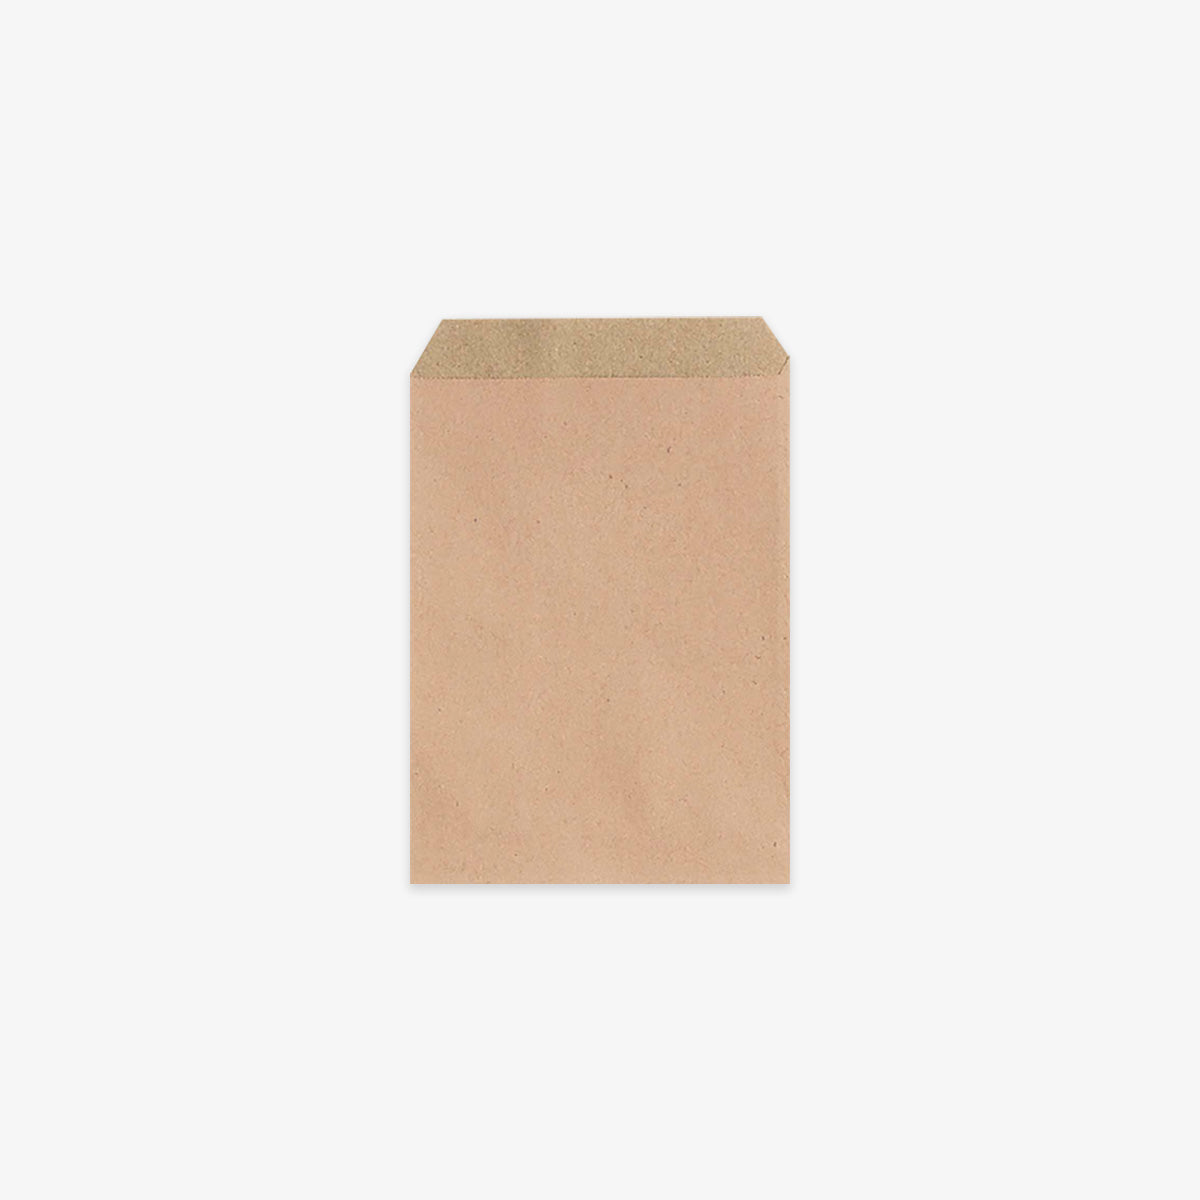 NUDE PAPER GIFT BAG // M